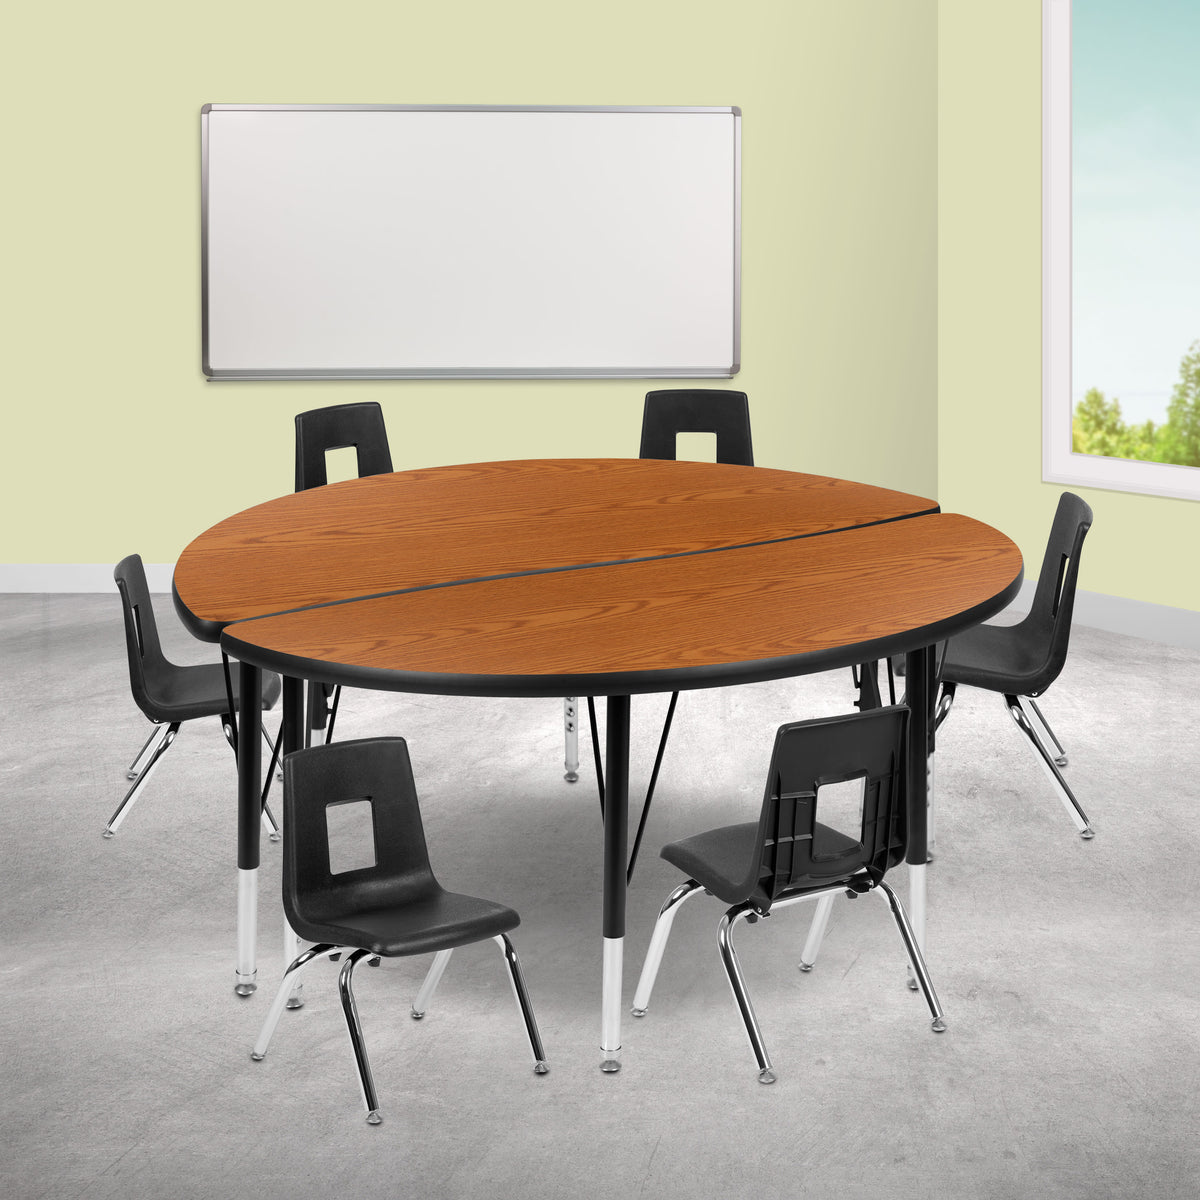 Oak |#| 47.5inch Circle Wave Activity Table Set with 12inch Student Stack Chairs, Oak/Black